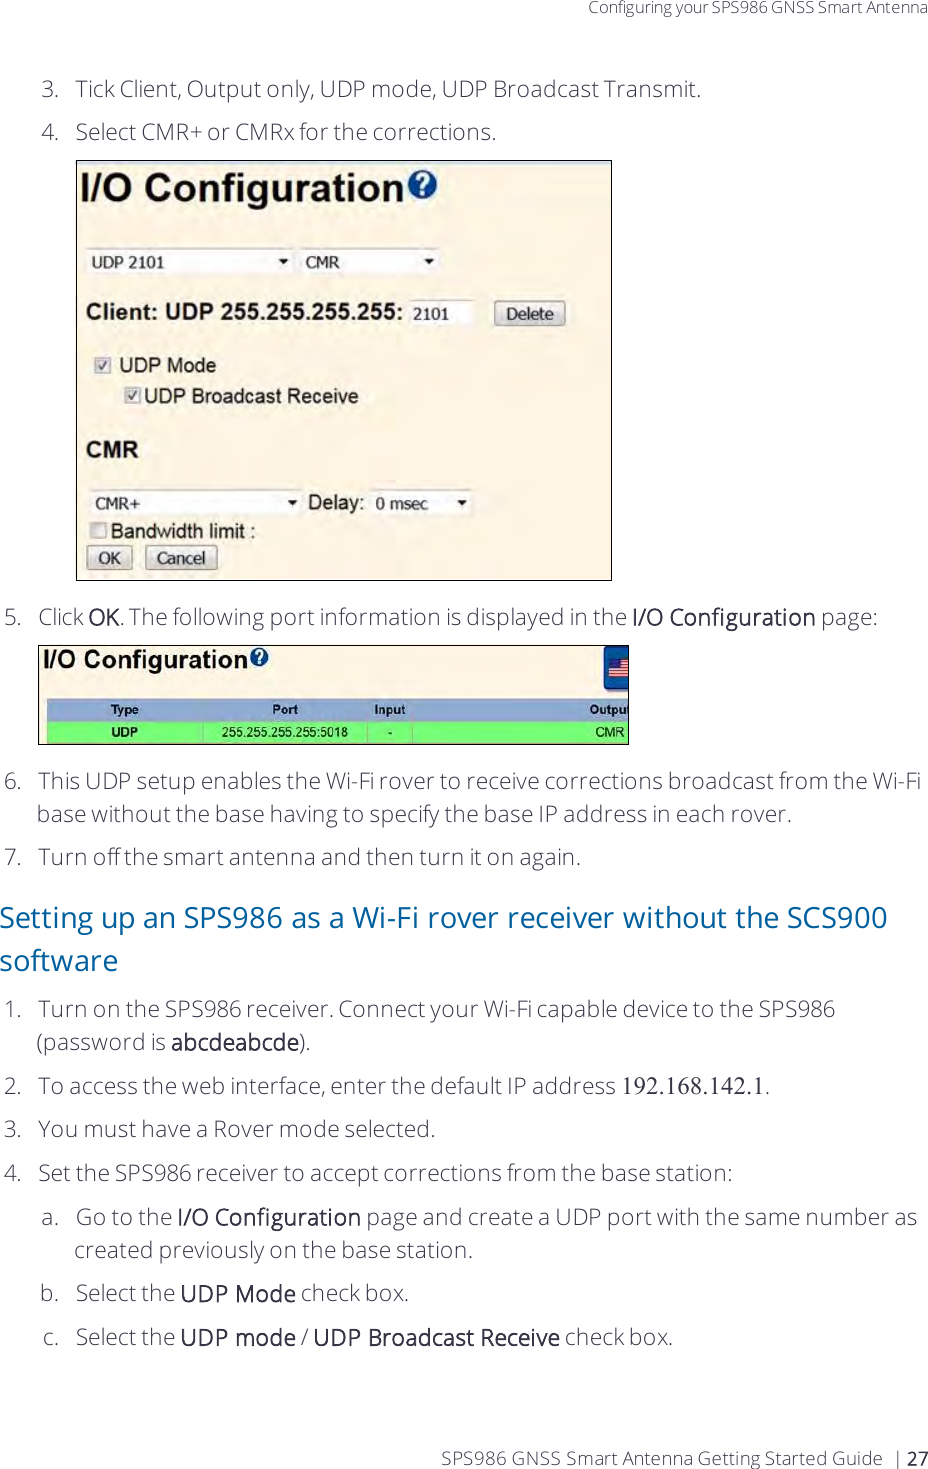 Configuring your SPS986 GNSS Smart Antenna3.  Tick Client, Output only, UDP mode, UDP Broadcast Transmit.4.  Select CMR+ or CMRx for the corrections.5.  Click OK. The following port information is displayed in the I/O Configuration page:6.  This UDP setup enables the Wi-Fi rover to receive corrections broadcast from the Wi-Fi base without the base having to specify the base IP address in each rover.7.  Turn off the smart antenna and then turn it on again. Setting up an SPS986 as a Wi-Fi rover receiver without the SCS900 software1.  Turn on the SPS986 receiver. Connect your Wi-Fi capable device to the SPS986  (password is abcdeabcde).2.  To access the web interface, enter the default IP address 192.168.142.1.3.  You must have a Rover mode selected.4.  Set the SPS986 receiver to accept corrections from the base station:a.  Go to the I/O Configuration page and create a UDP port with the same number as created previously on the base station. b.  Select the UDP Mode check box.c.  Select the UDP mode / UDP Broadcast Receive check box.SPS986 GNSS Smart Antenna Getting Started Guide | 27